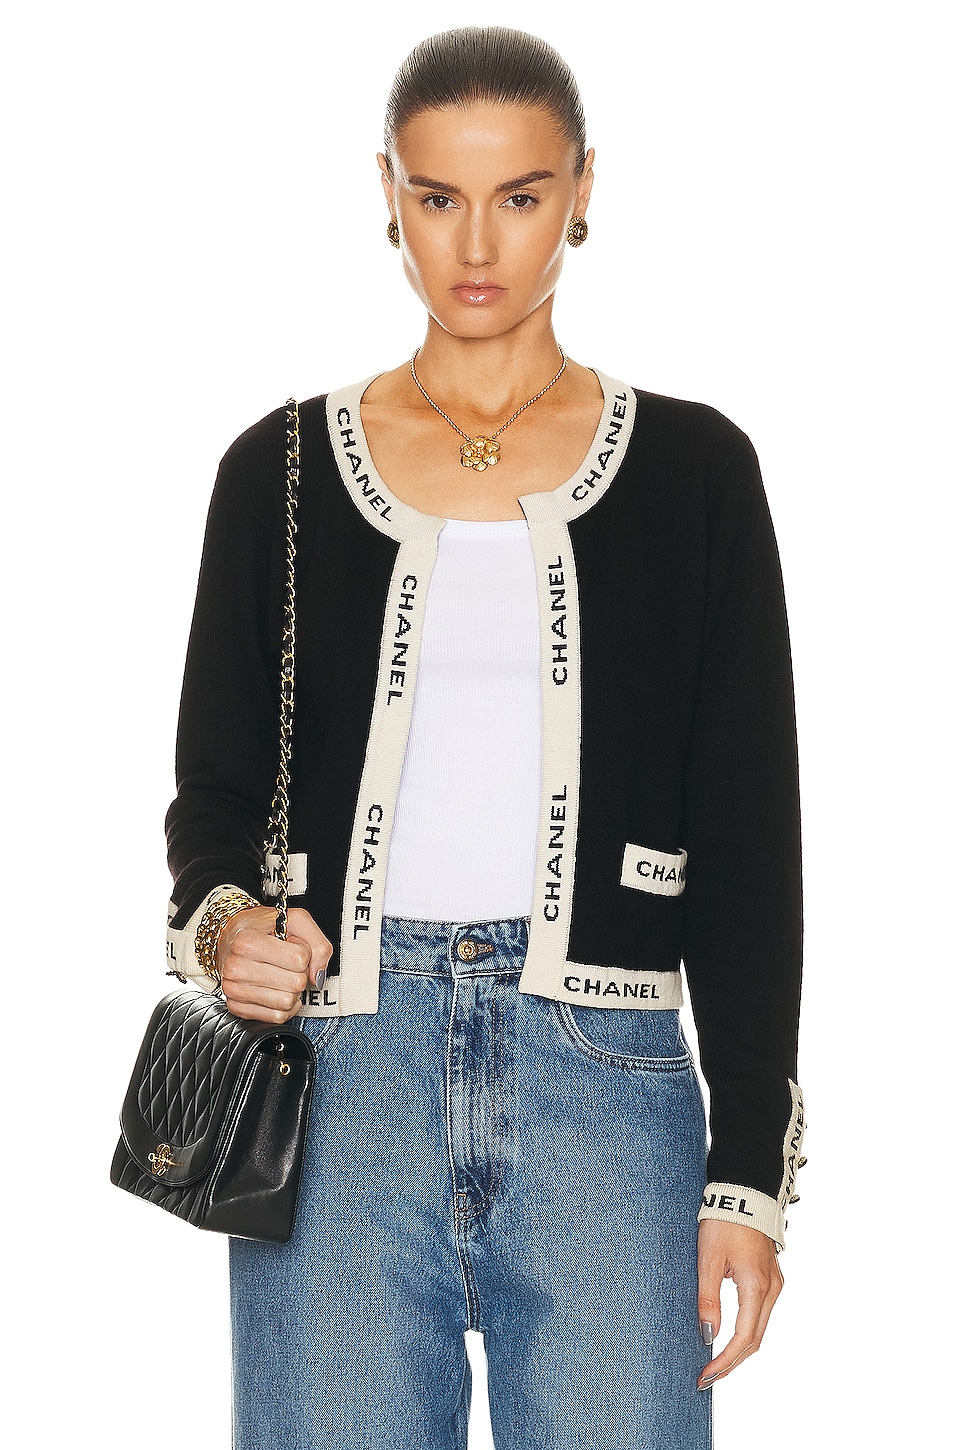 Image 1 of FWRD Renew Chanel 1995 Knit Cardigan in Black & White